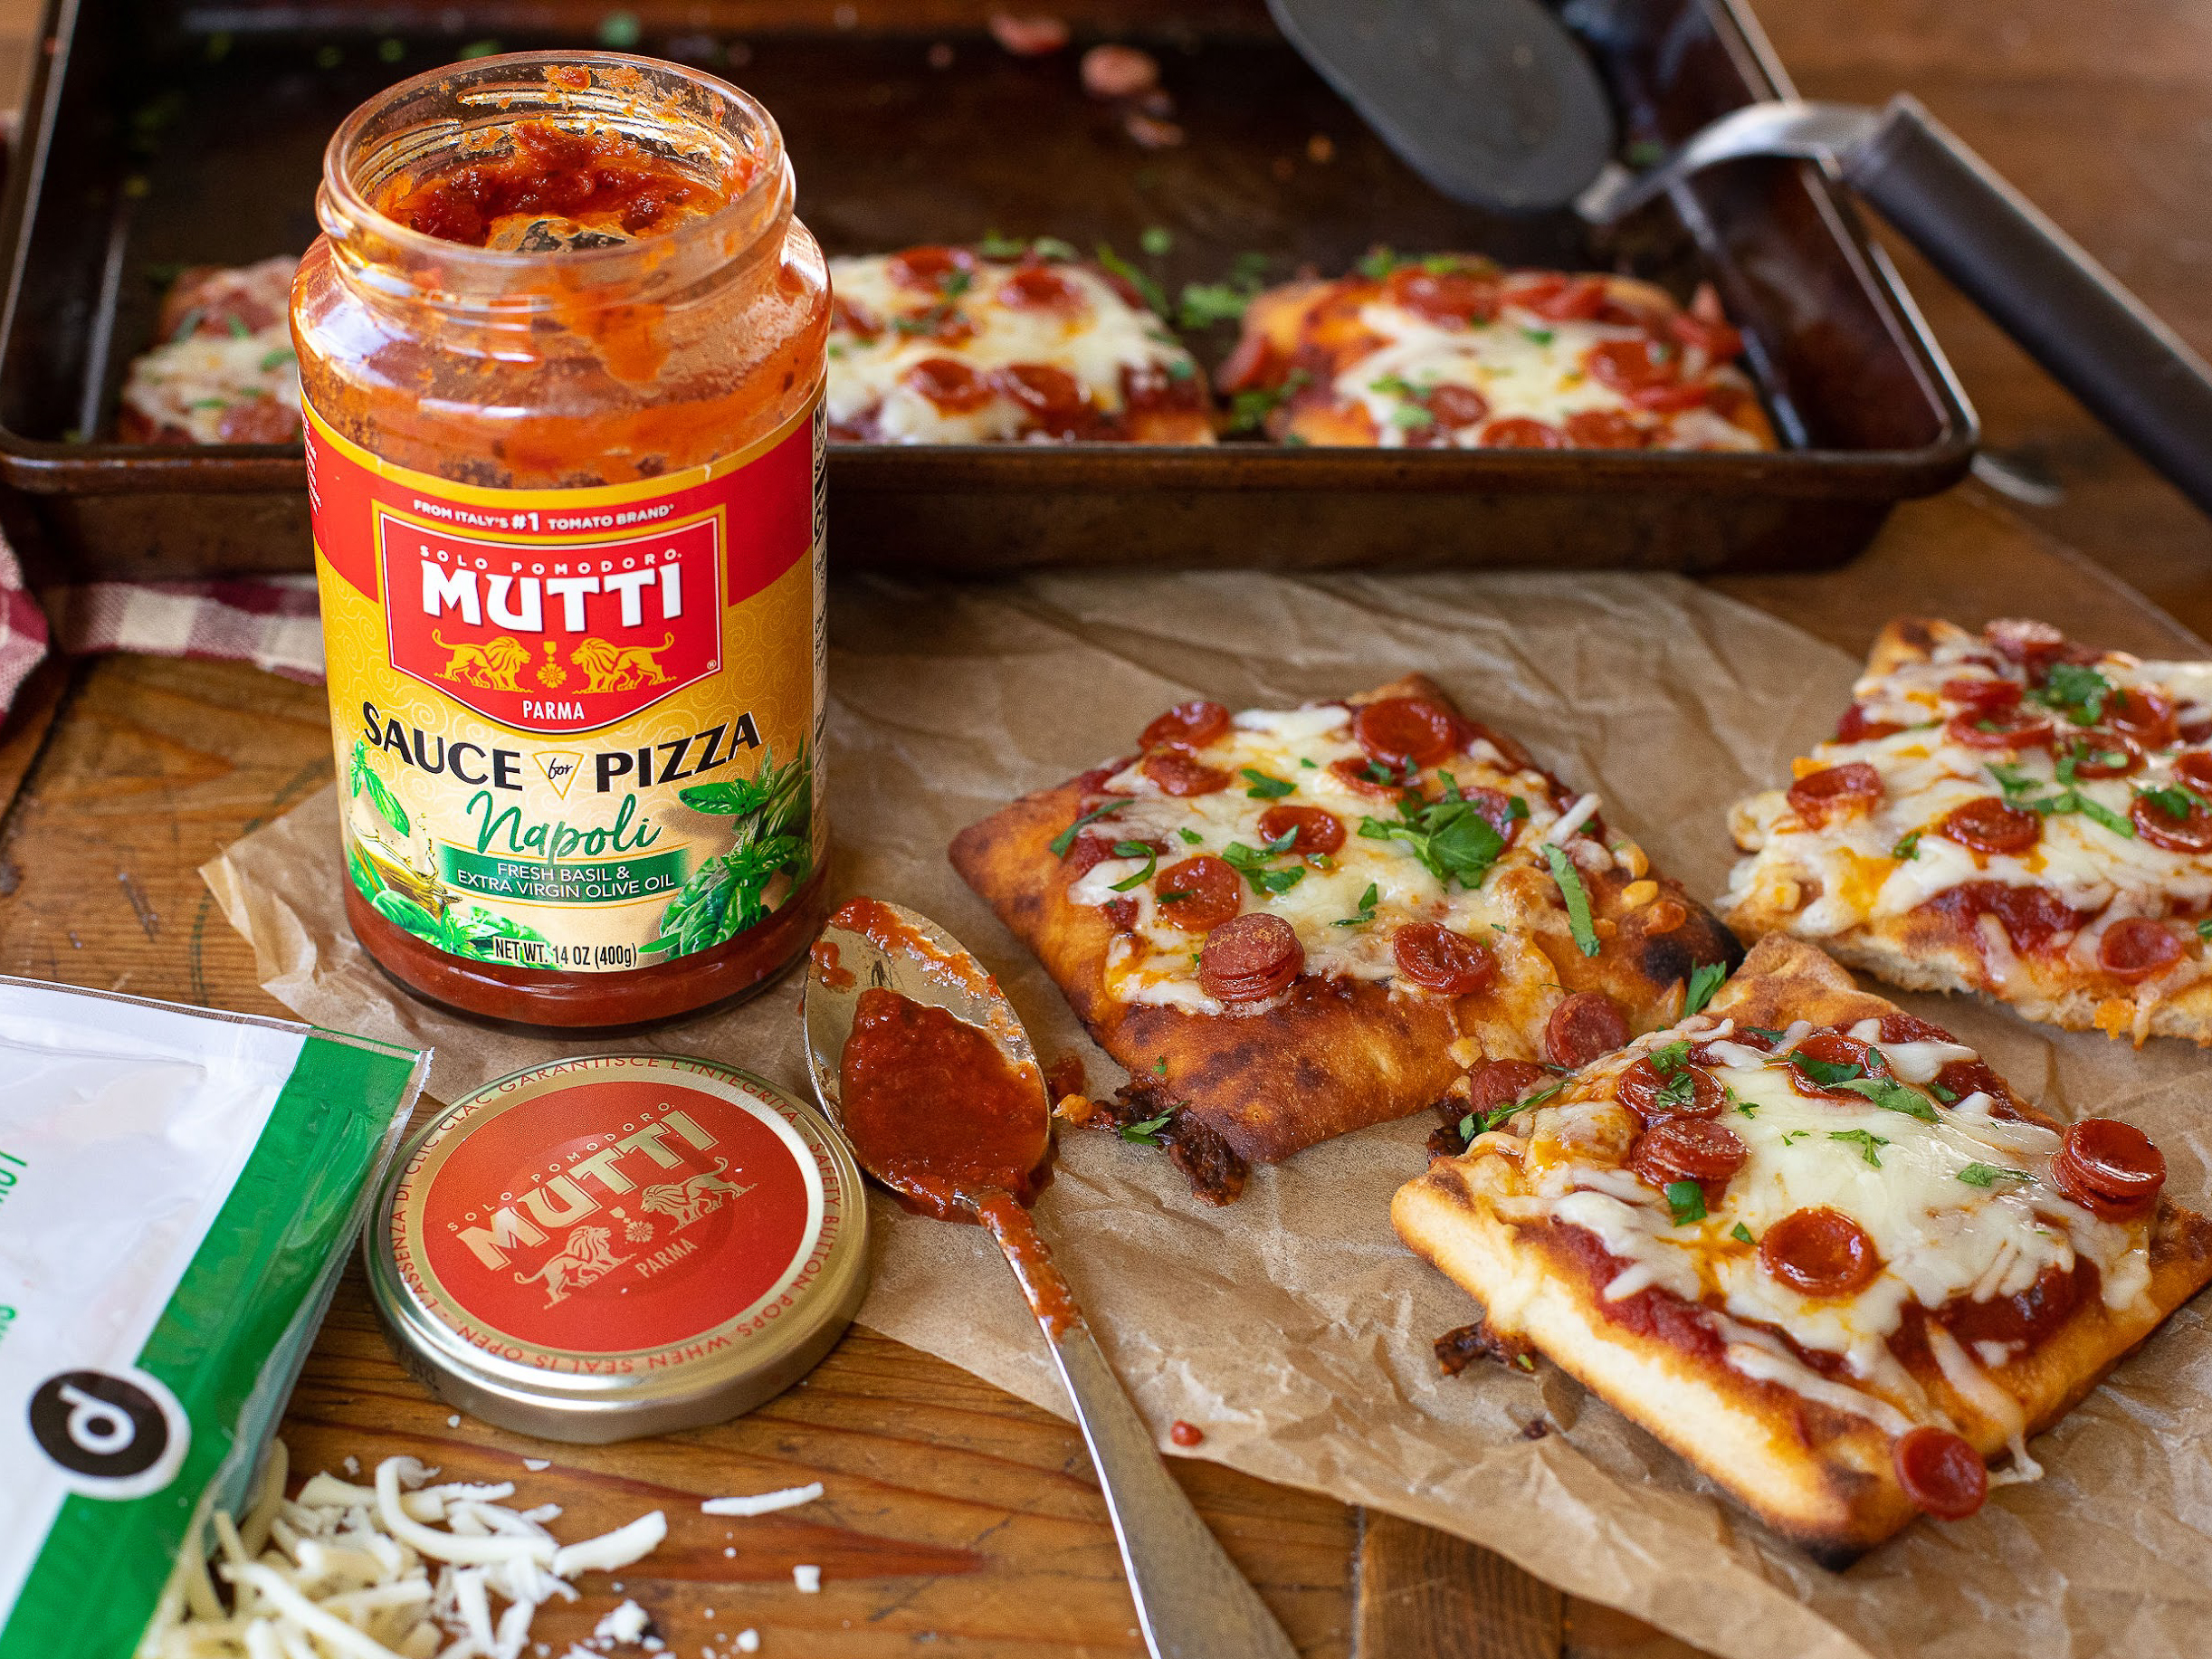 Mutti® Sauces for Pizza For Your Next Family Pizza Night - Save With New Publix Digital Coupon on I Heart Publix